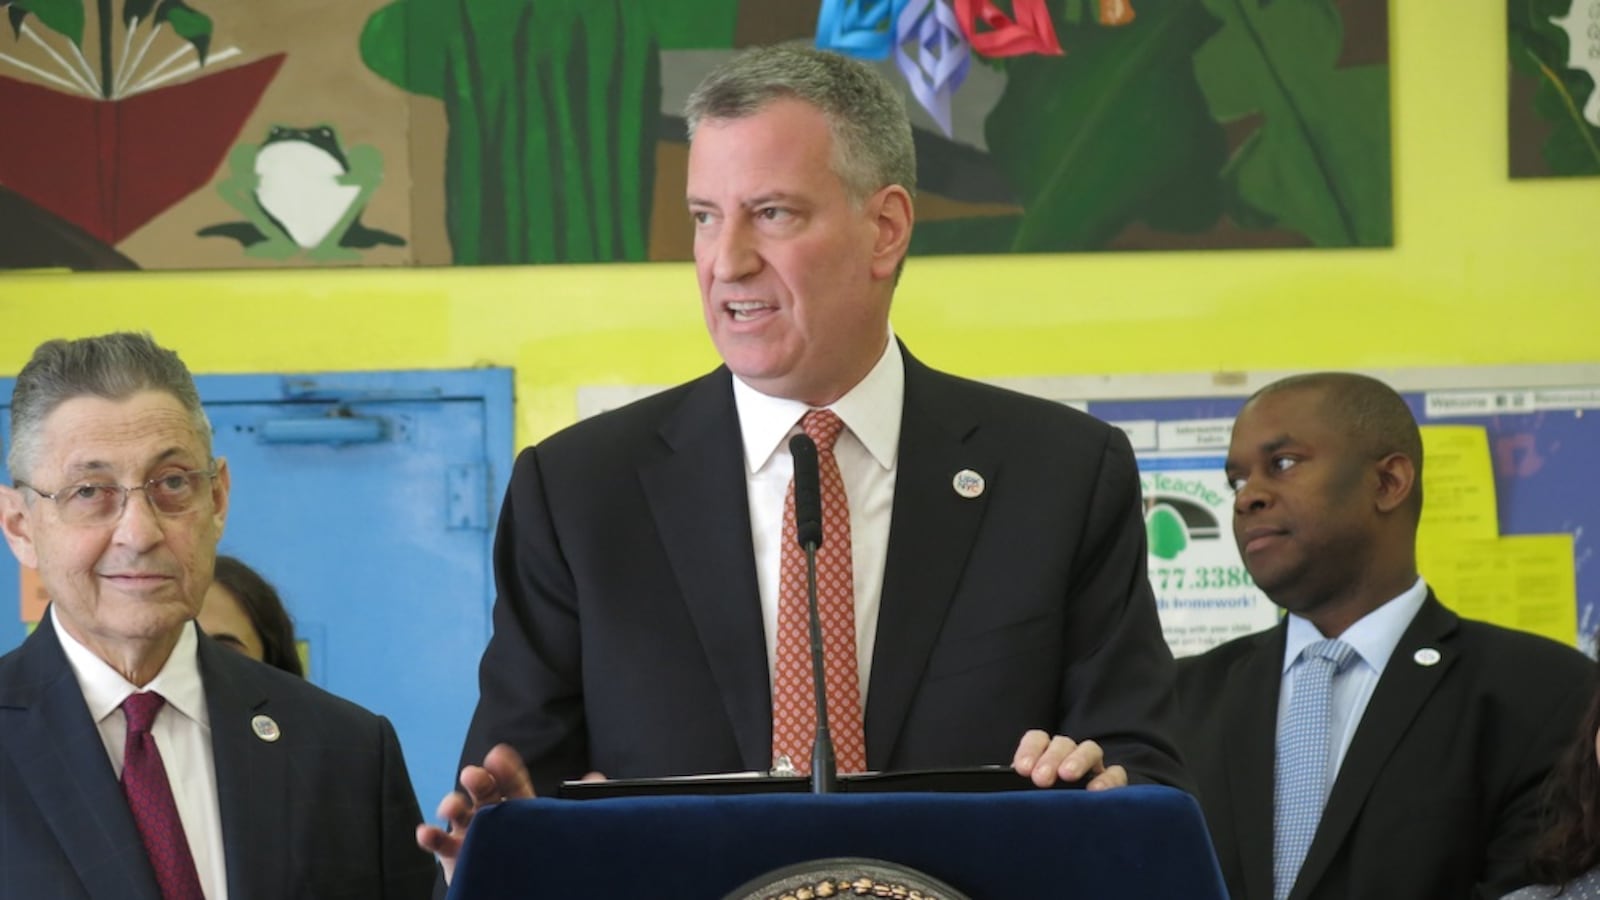 Mayor Bill de Blasio, with Assembly Speaker Sheldon Silver (left), at P.S. 1 on the Lower East Side.